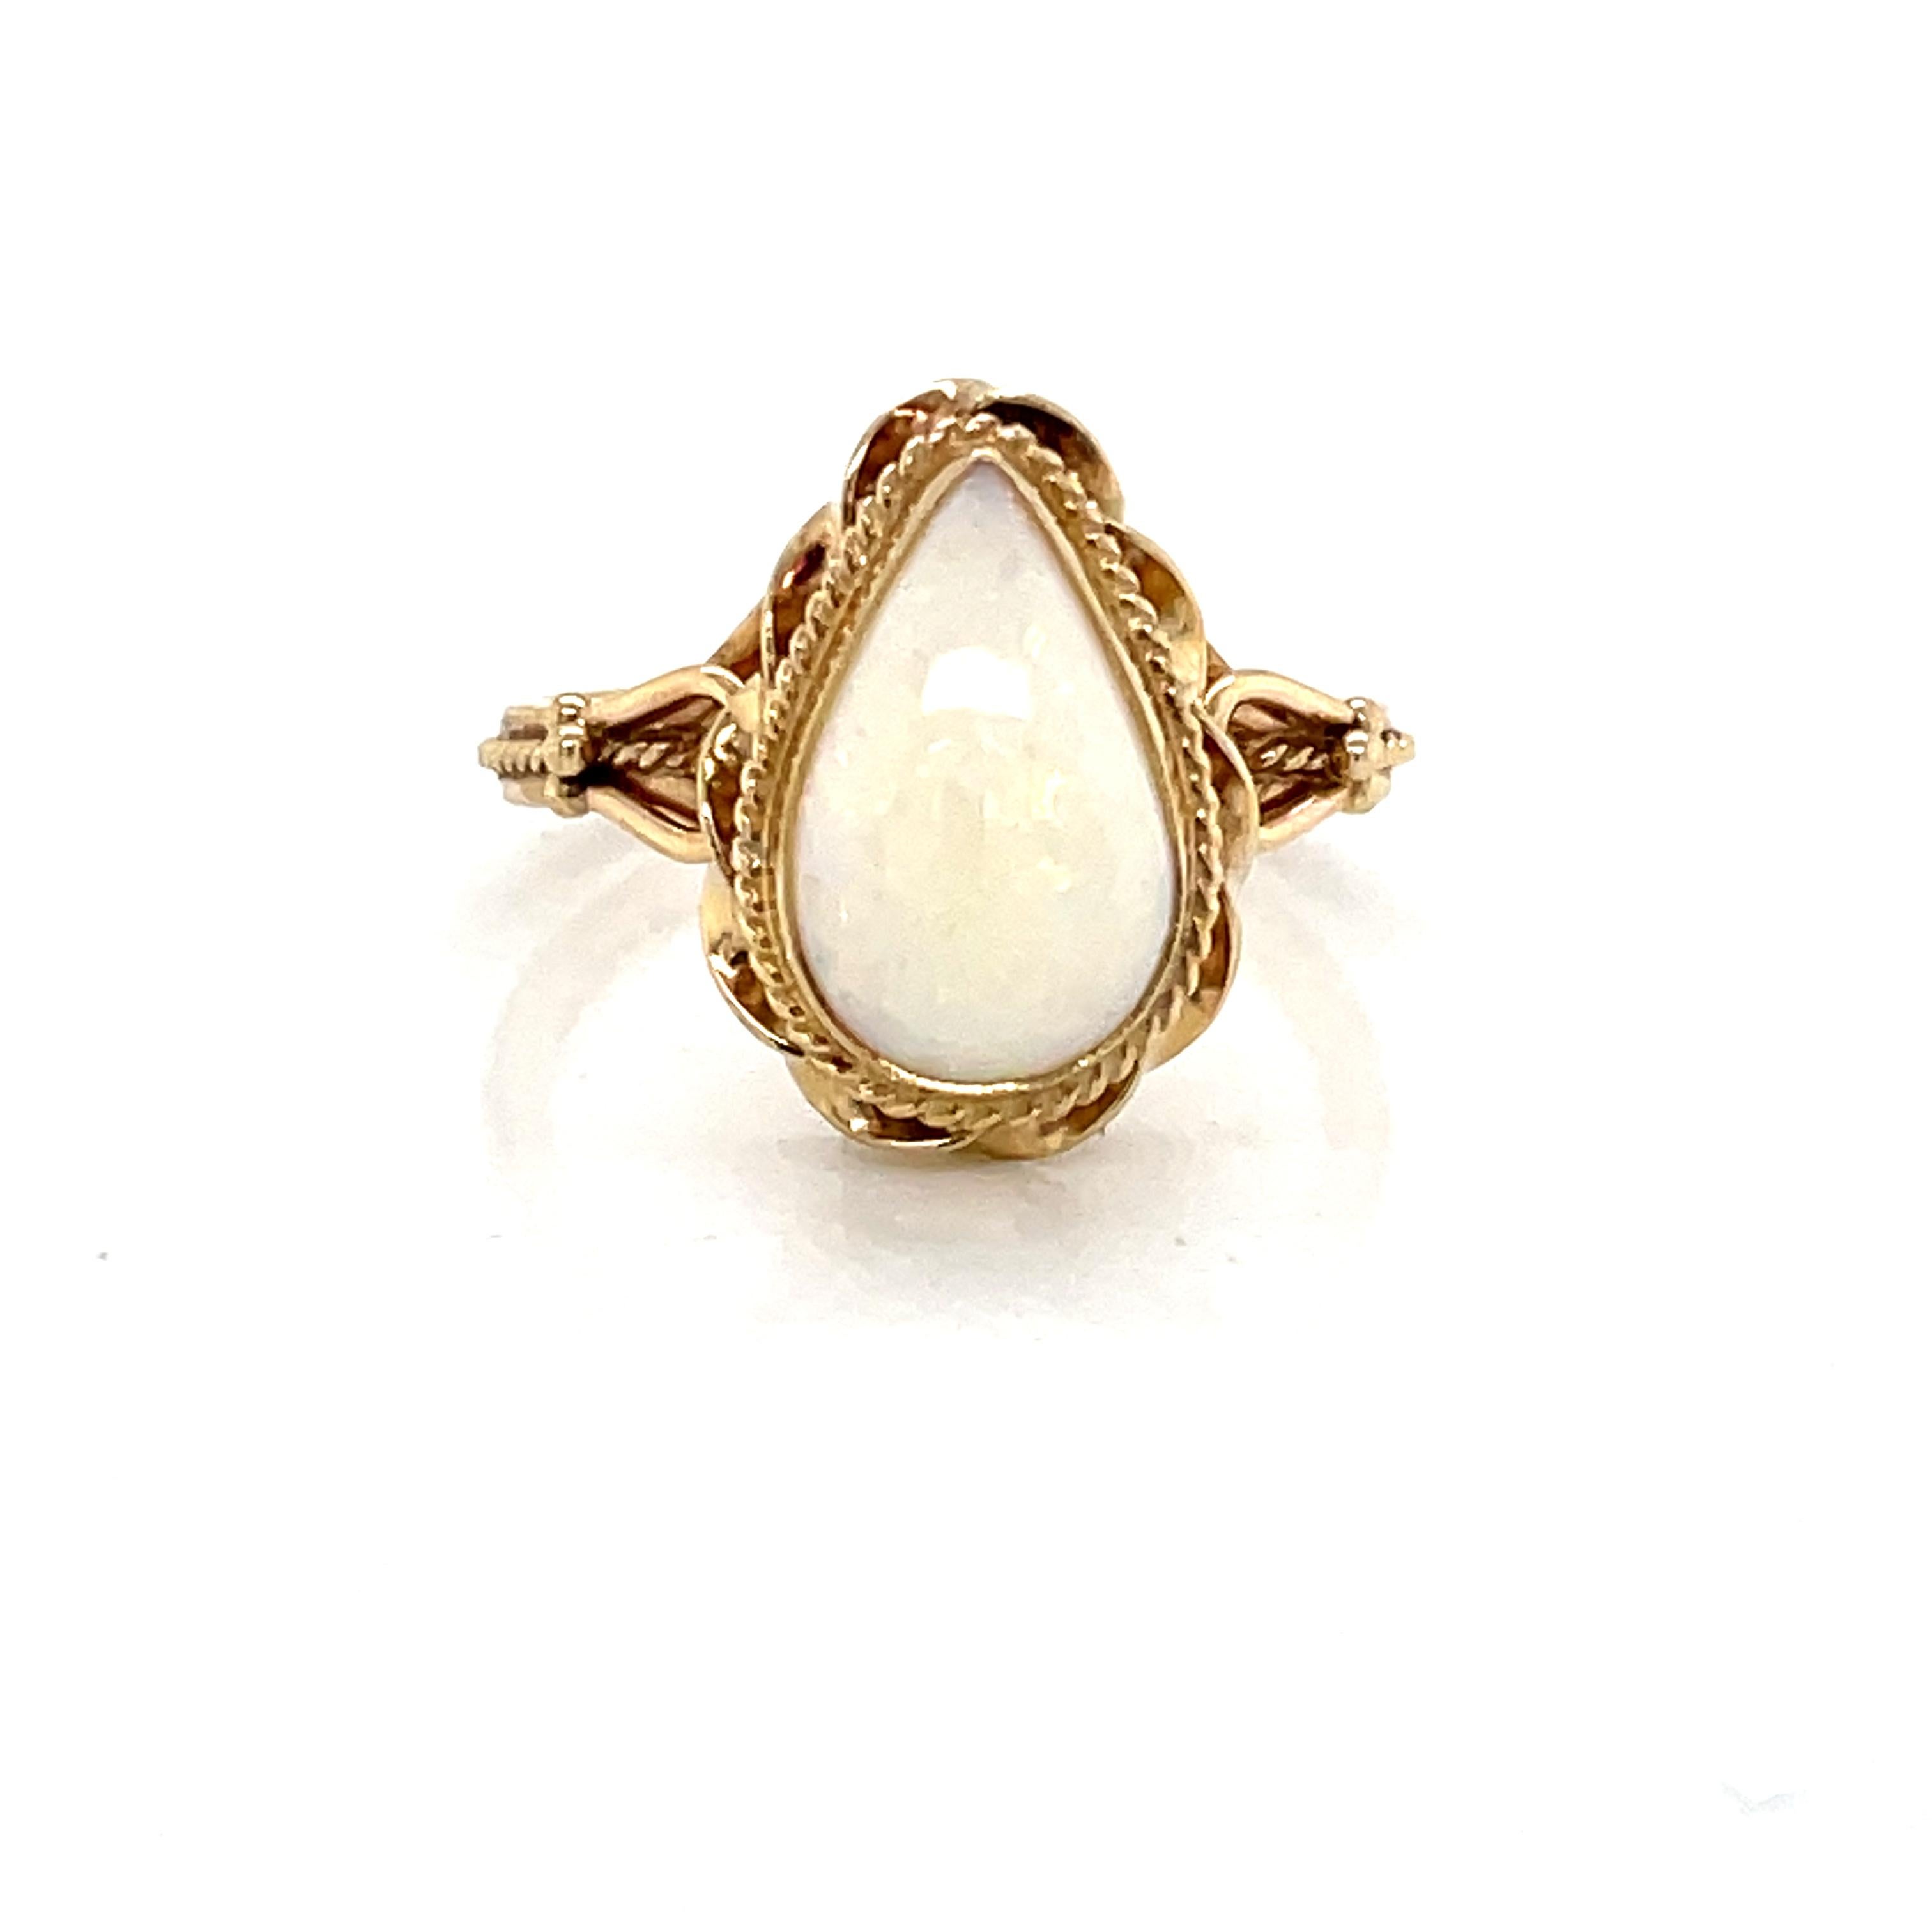 An elegant antique setting in fourteen karat yellow gold cradles the exquisite featured 8 x 4 mm pear shaped natural opal stone. Superb, with colorful iridescence, the opal gem stone is delicately framed with a fine twisted gold rope detail which